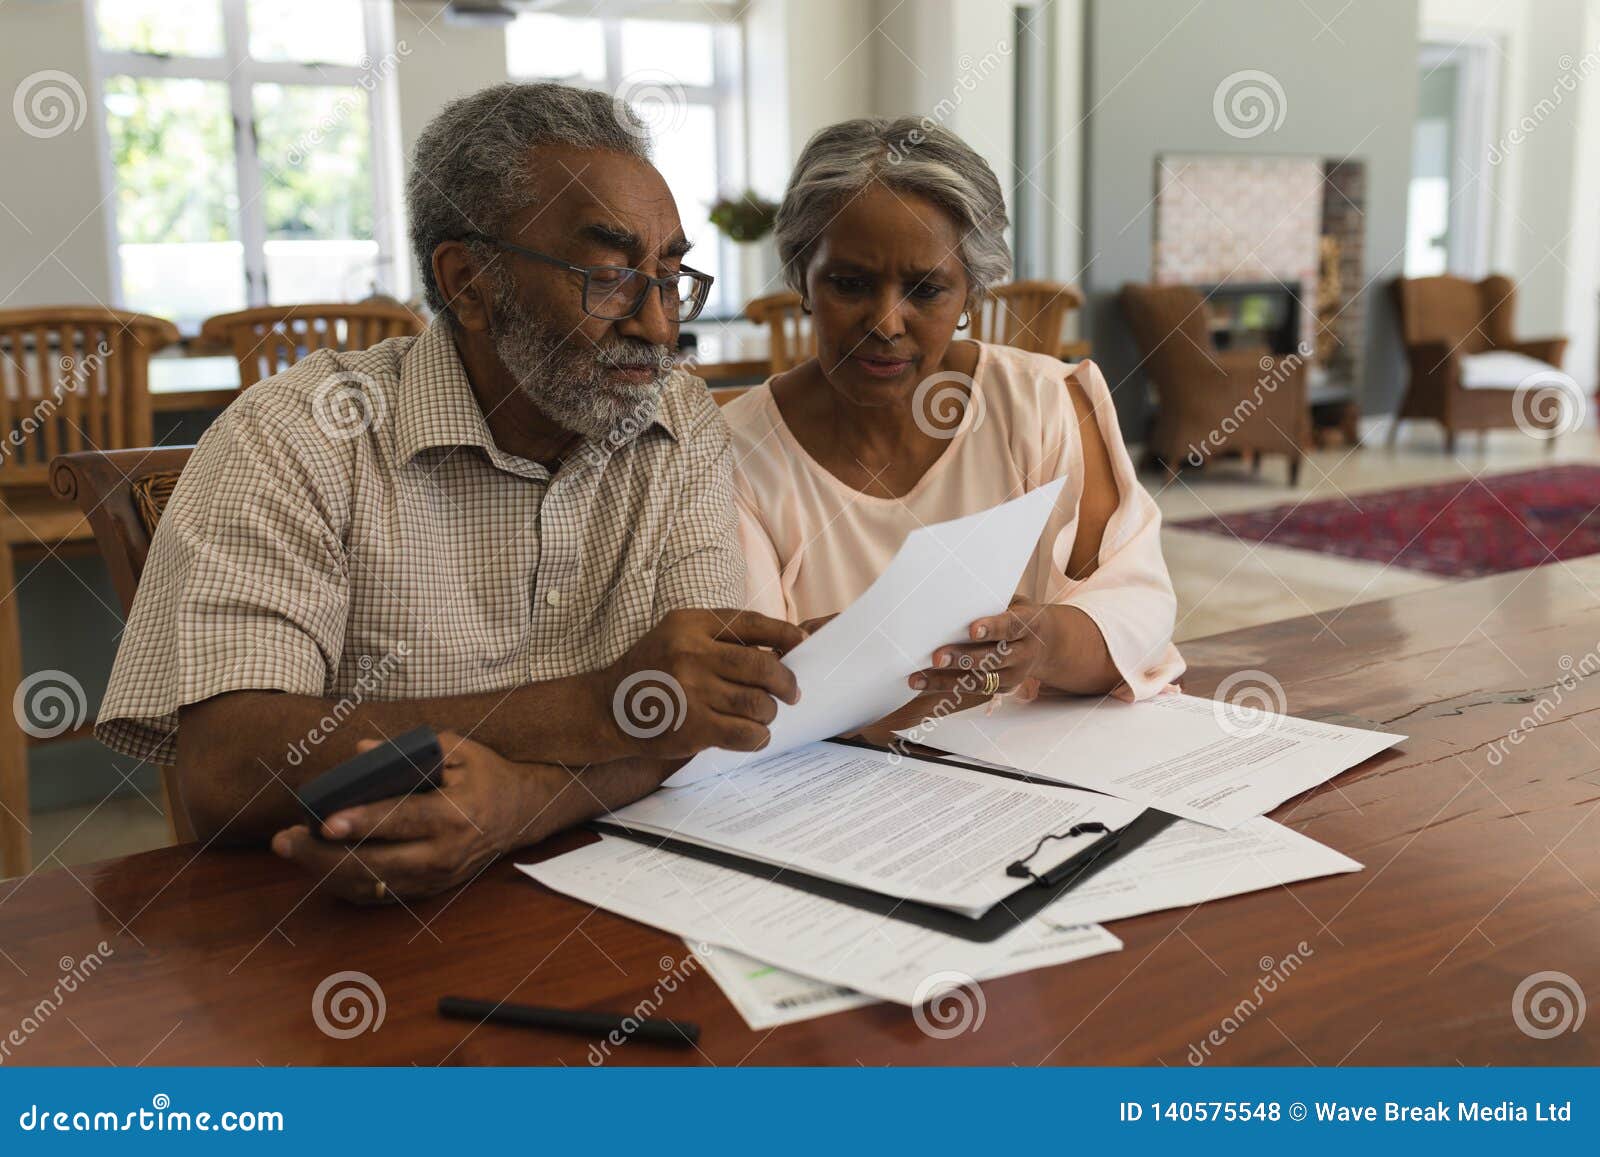 senior couple discussing over invoices at home